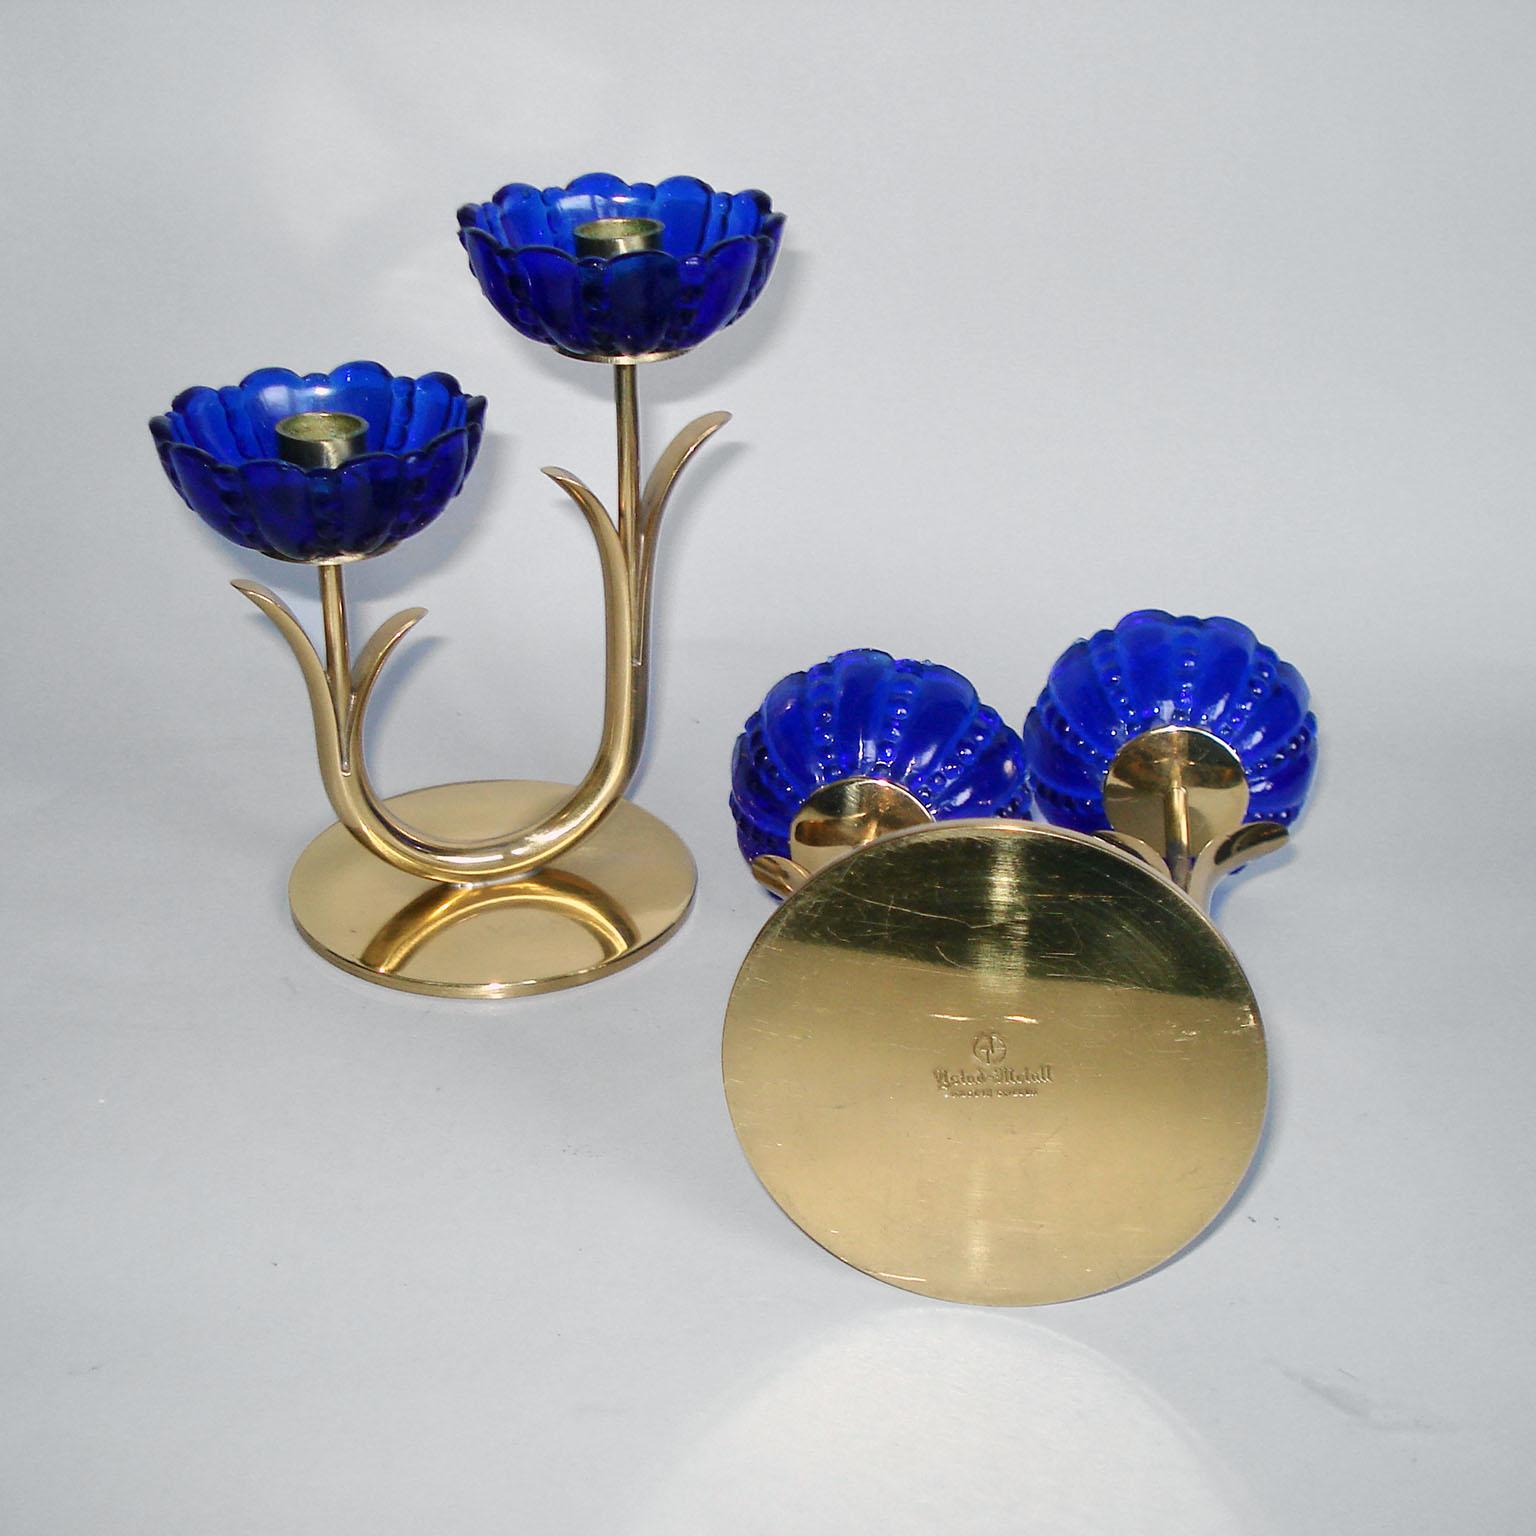 Gunnar Ander for Ystad Metall, Pair of Brass and Blue Glass Candlestick 1